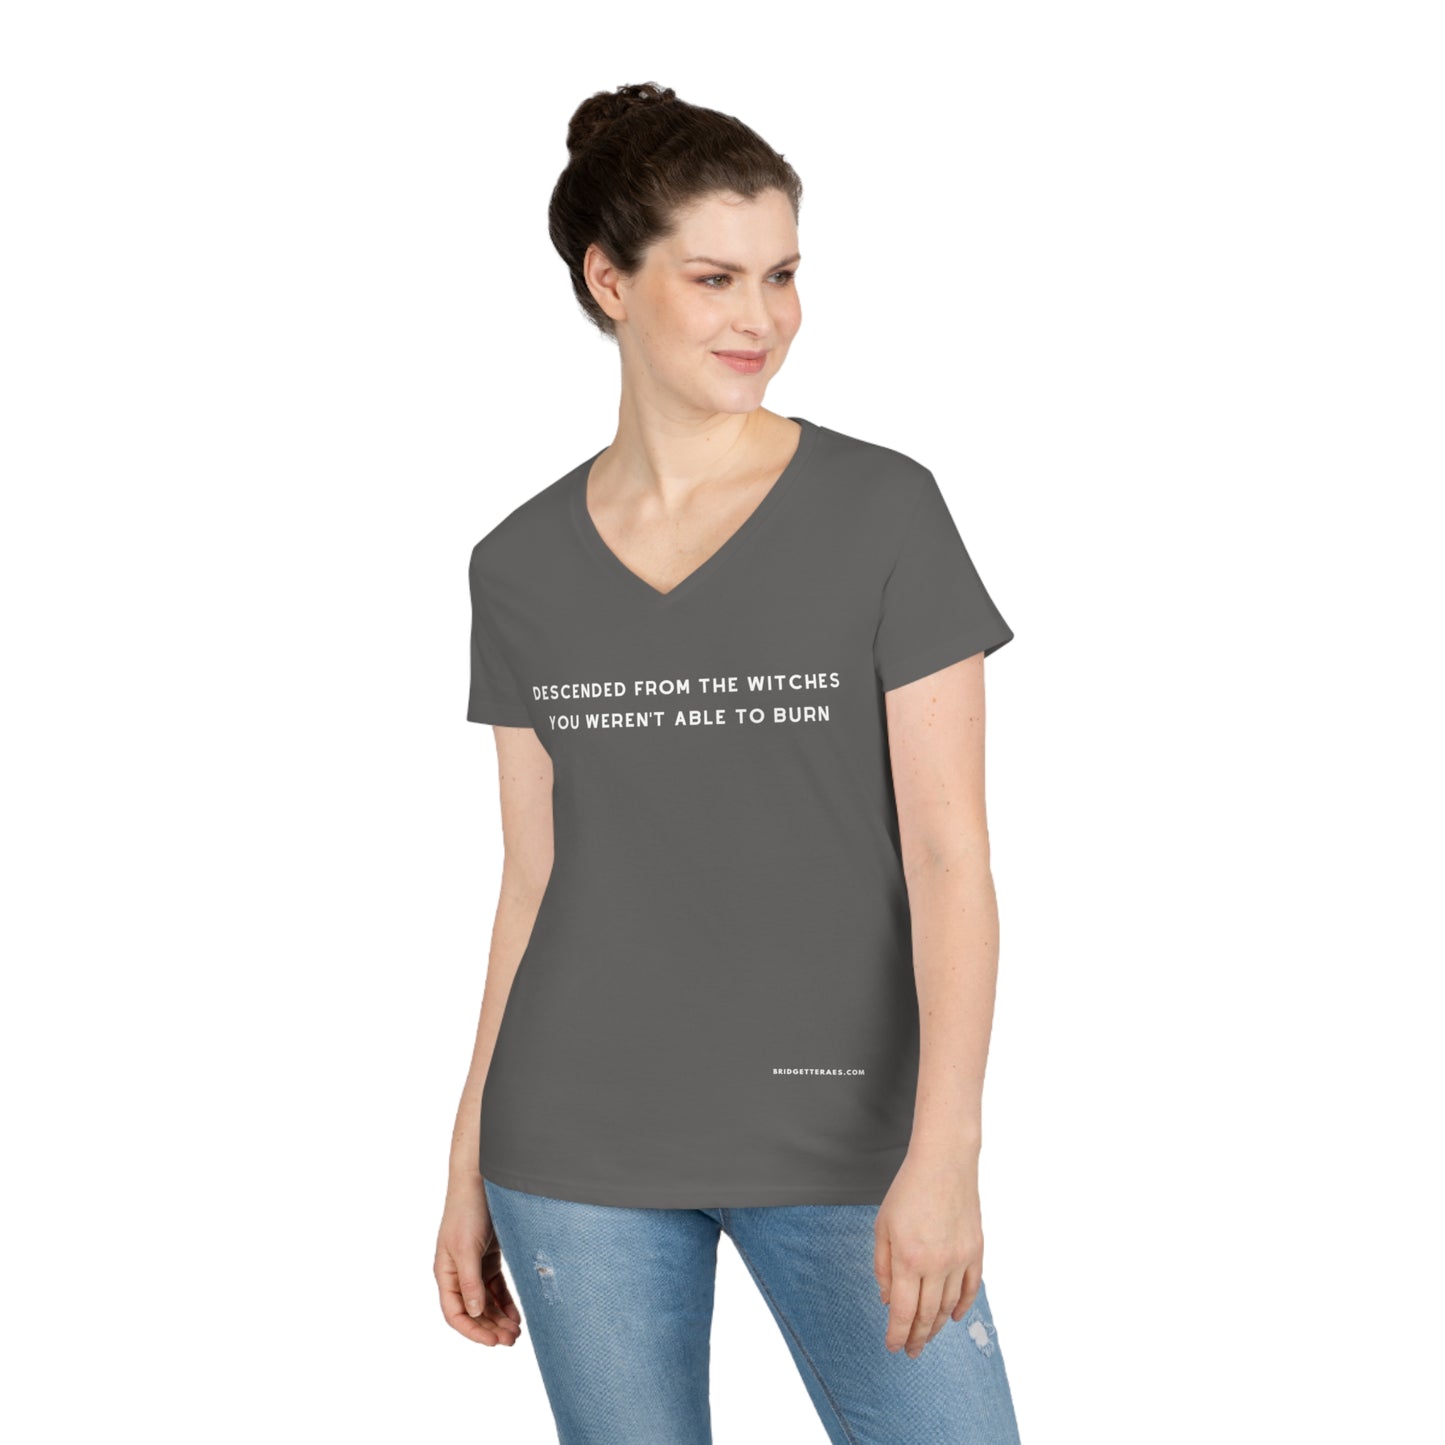 Descended From Witches You Weren't Able to Burn 100% Cotton V-Neck T-Shirt